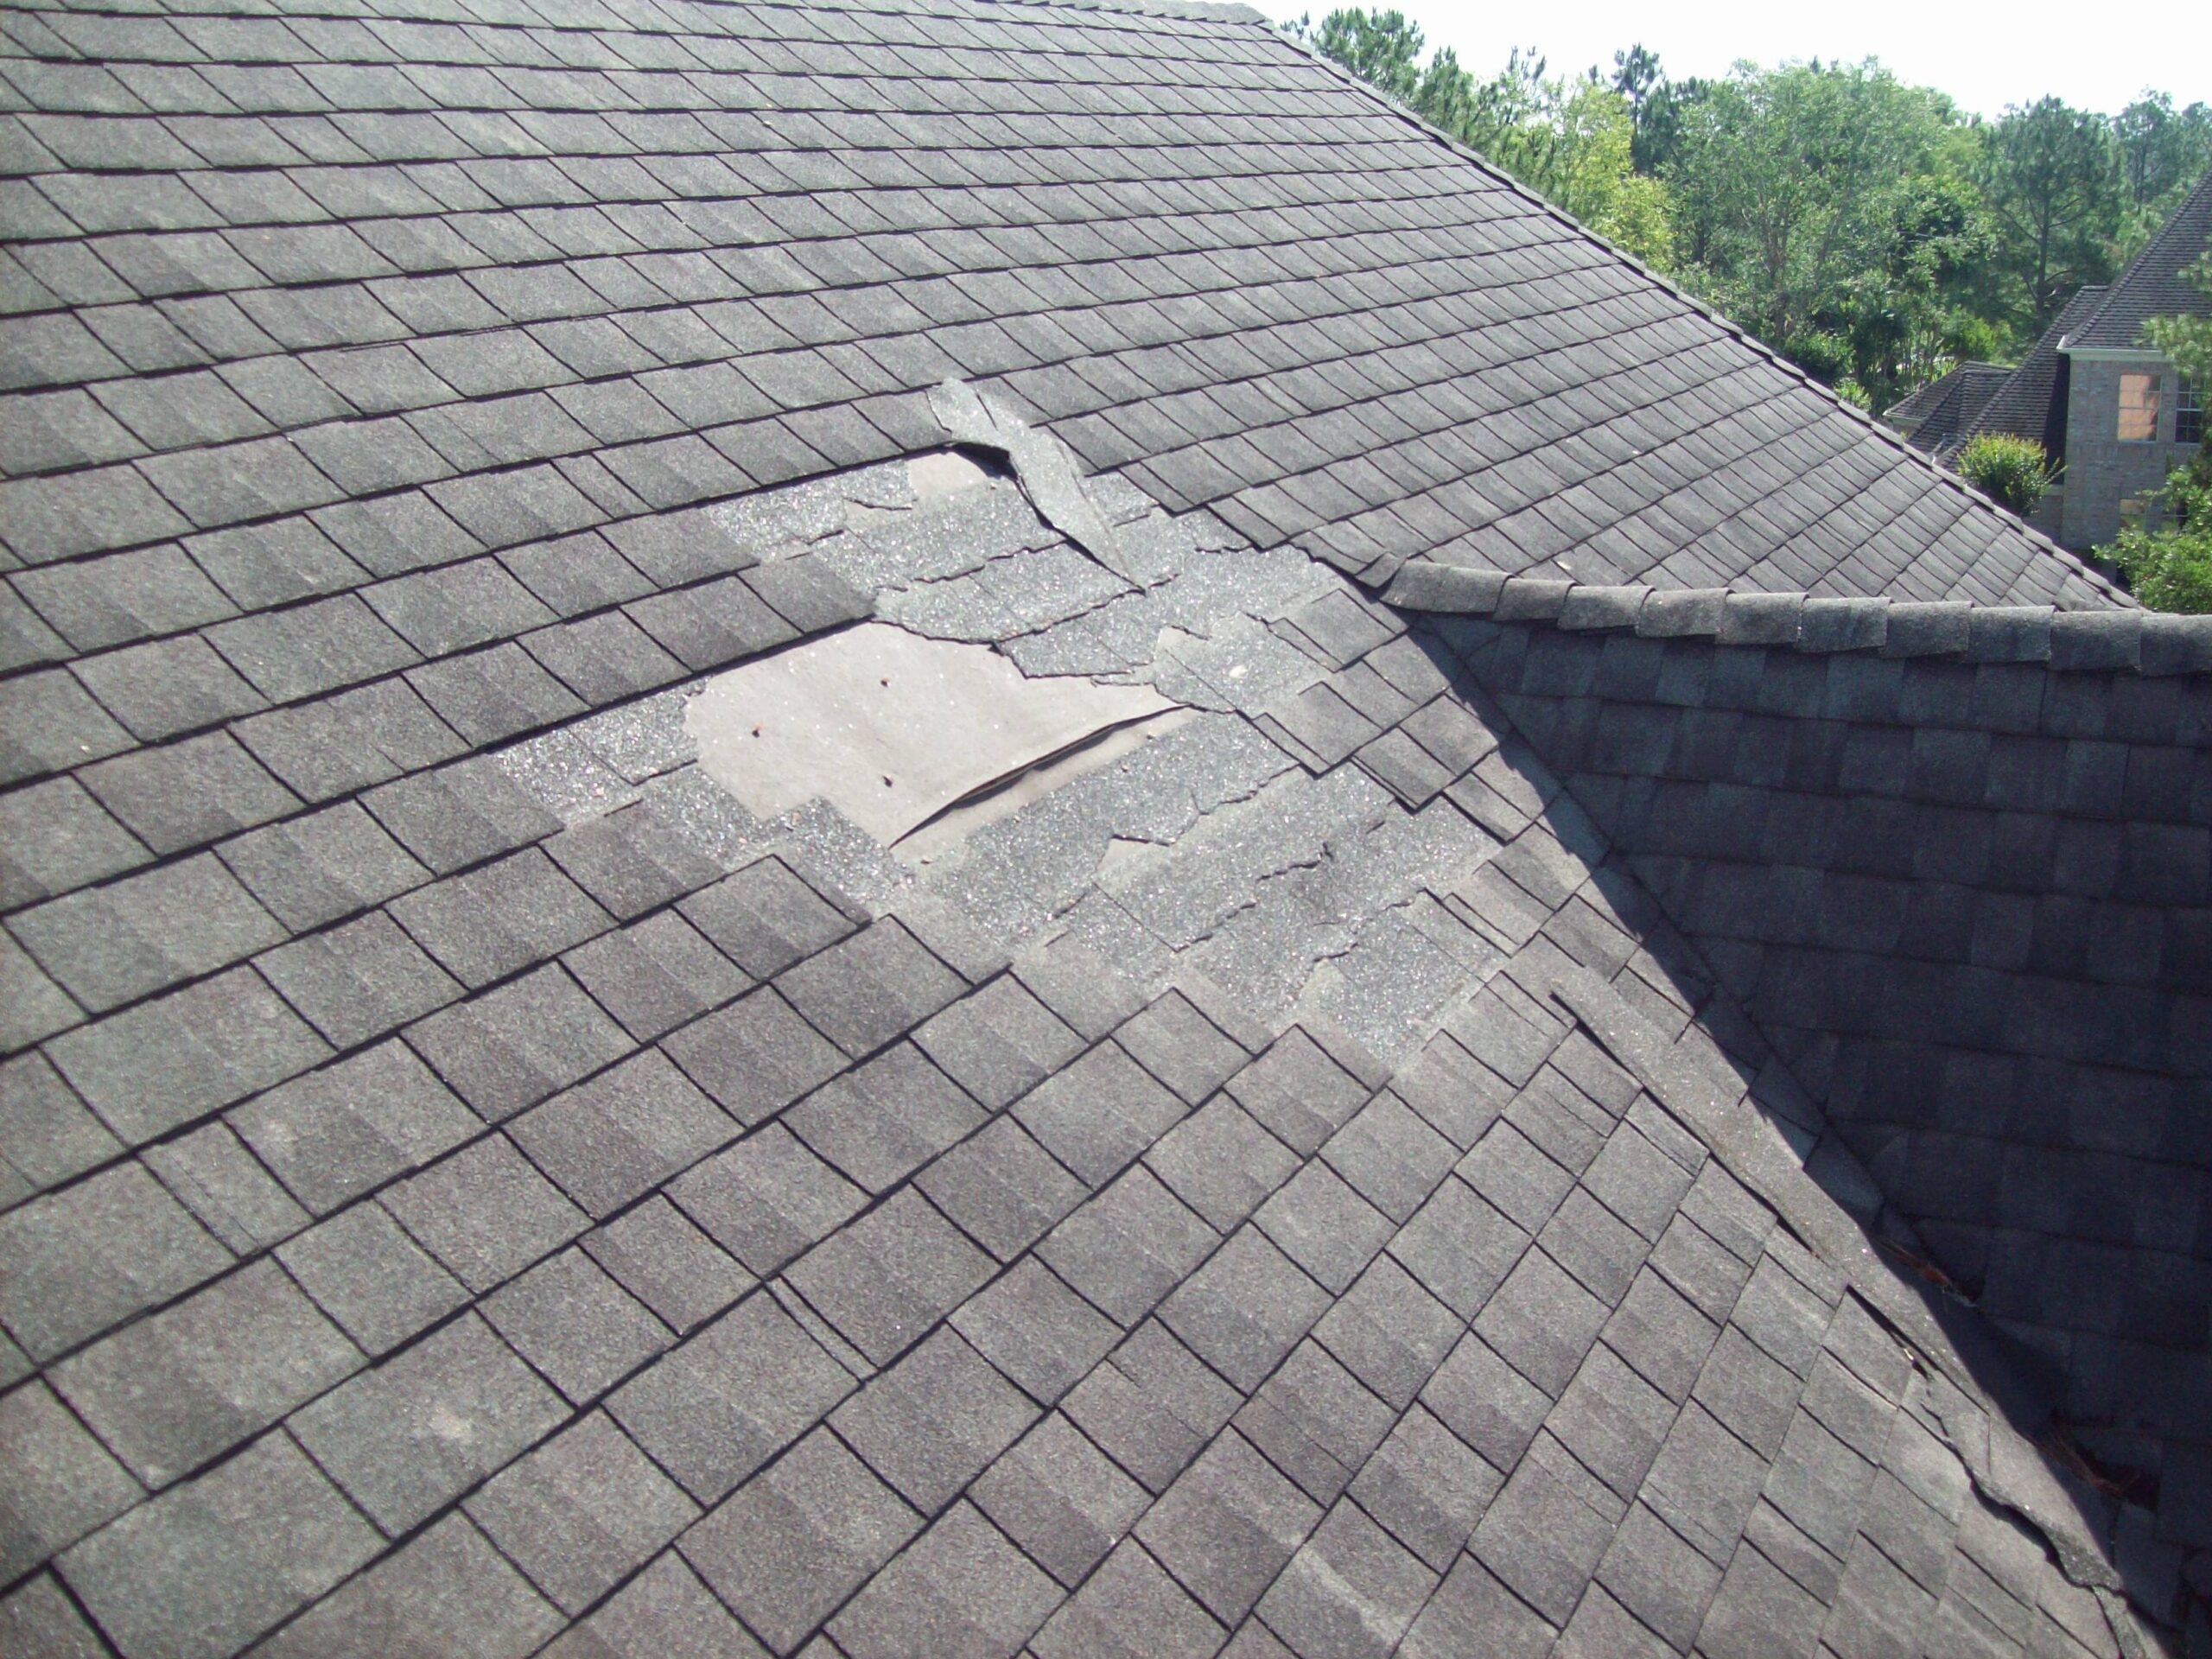 A residential roof that is missing shingles